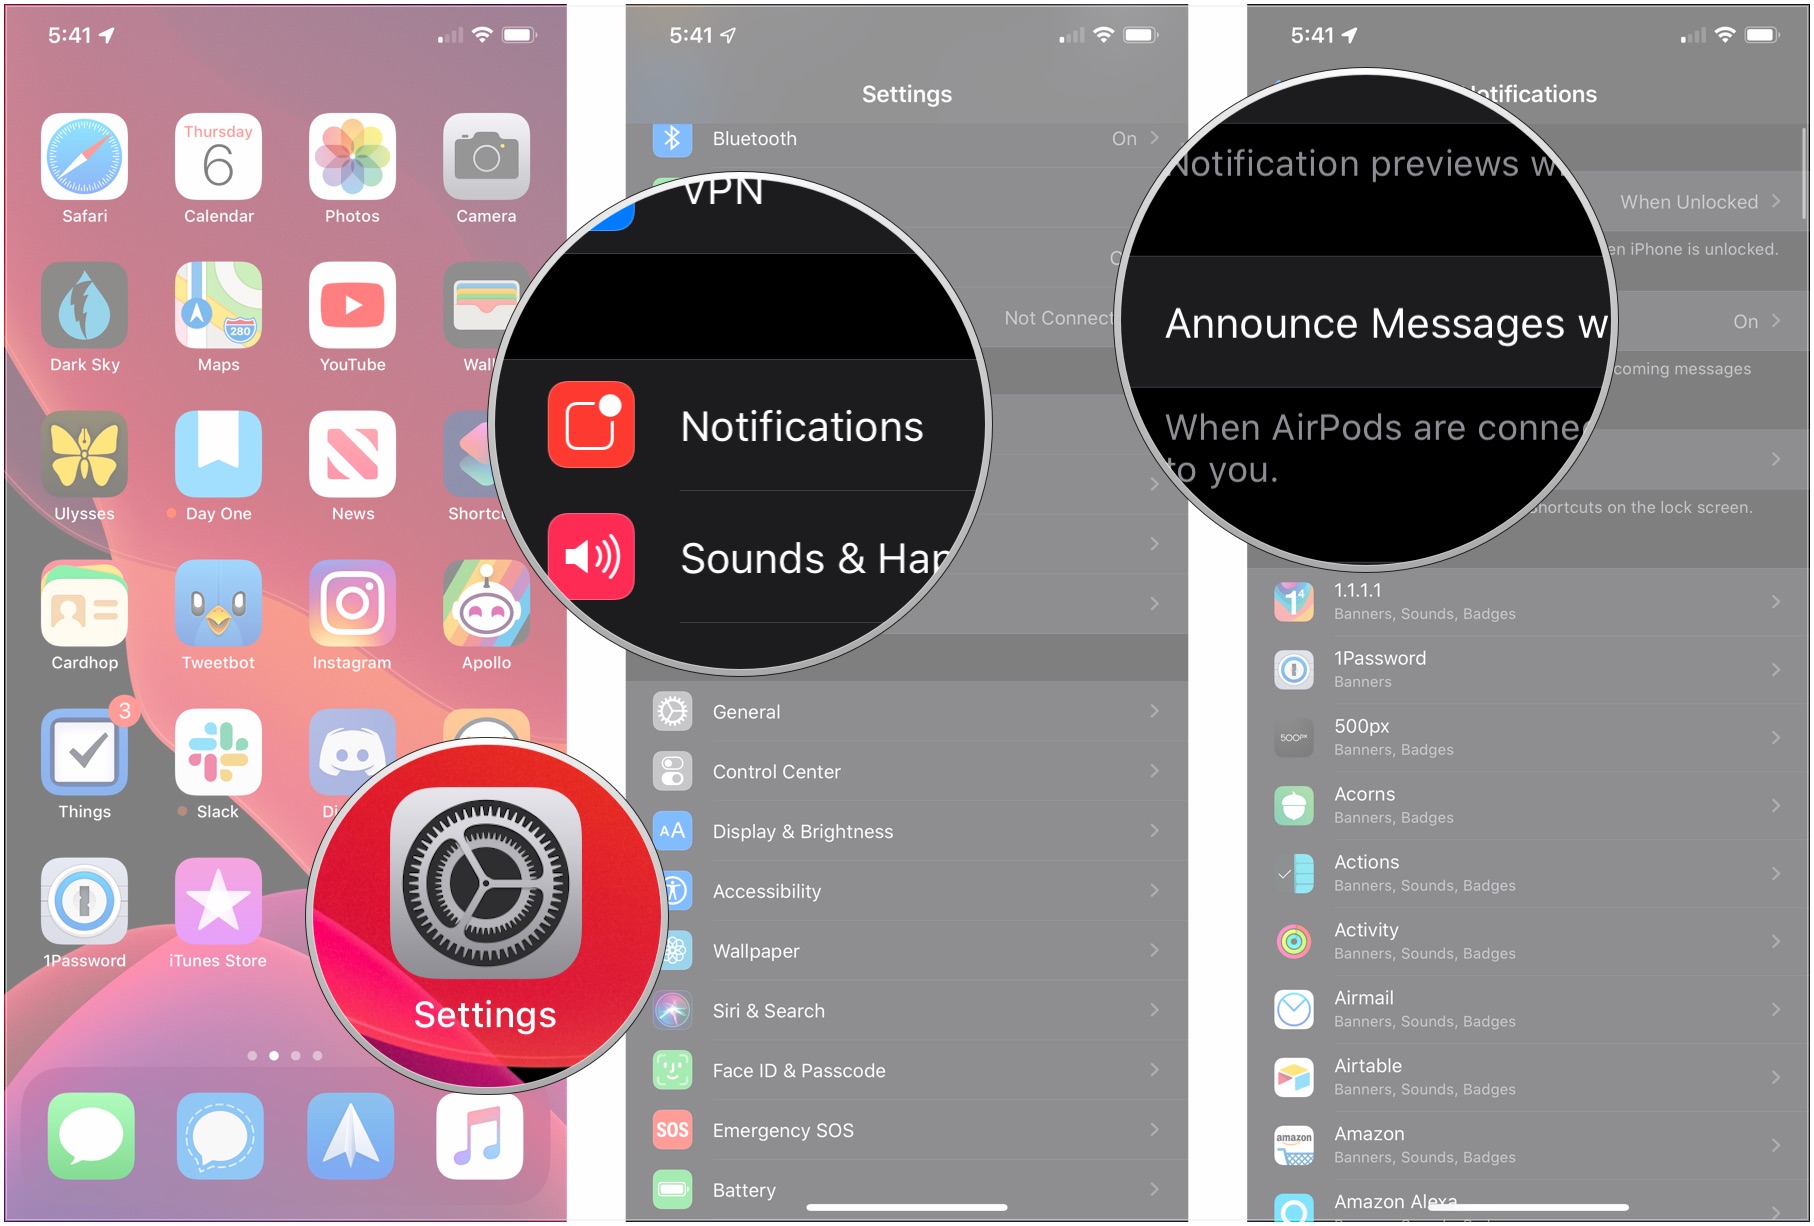 Open Settings, tap Notifications, tap Announce Messages with Siri